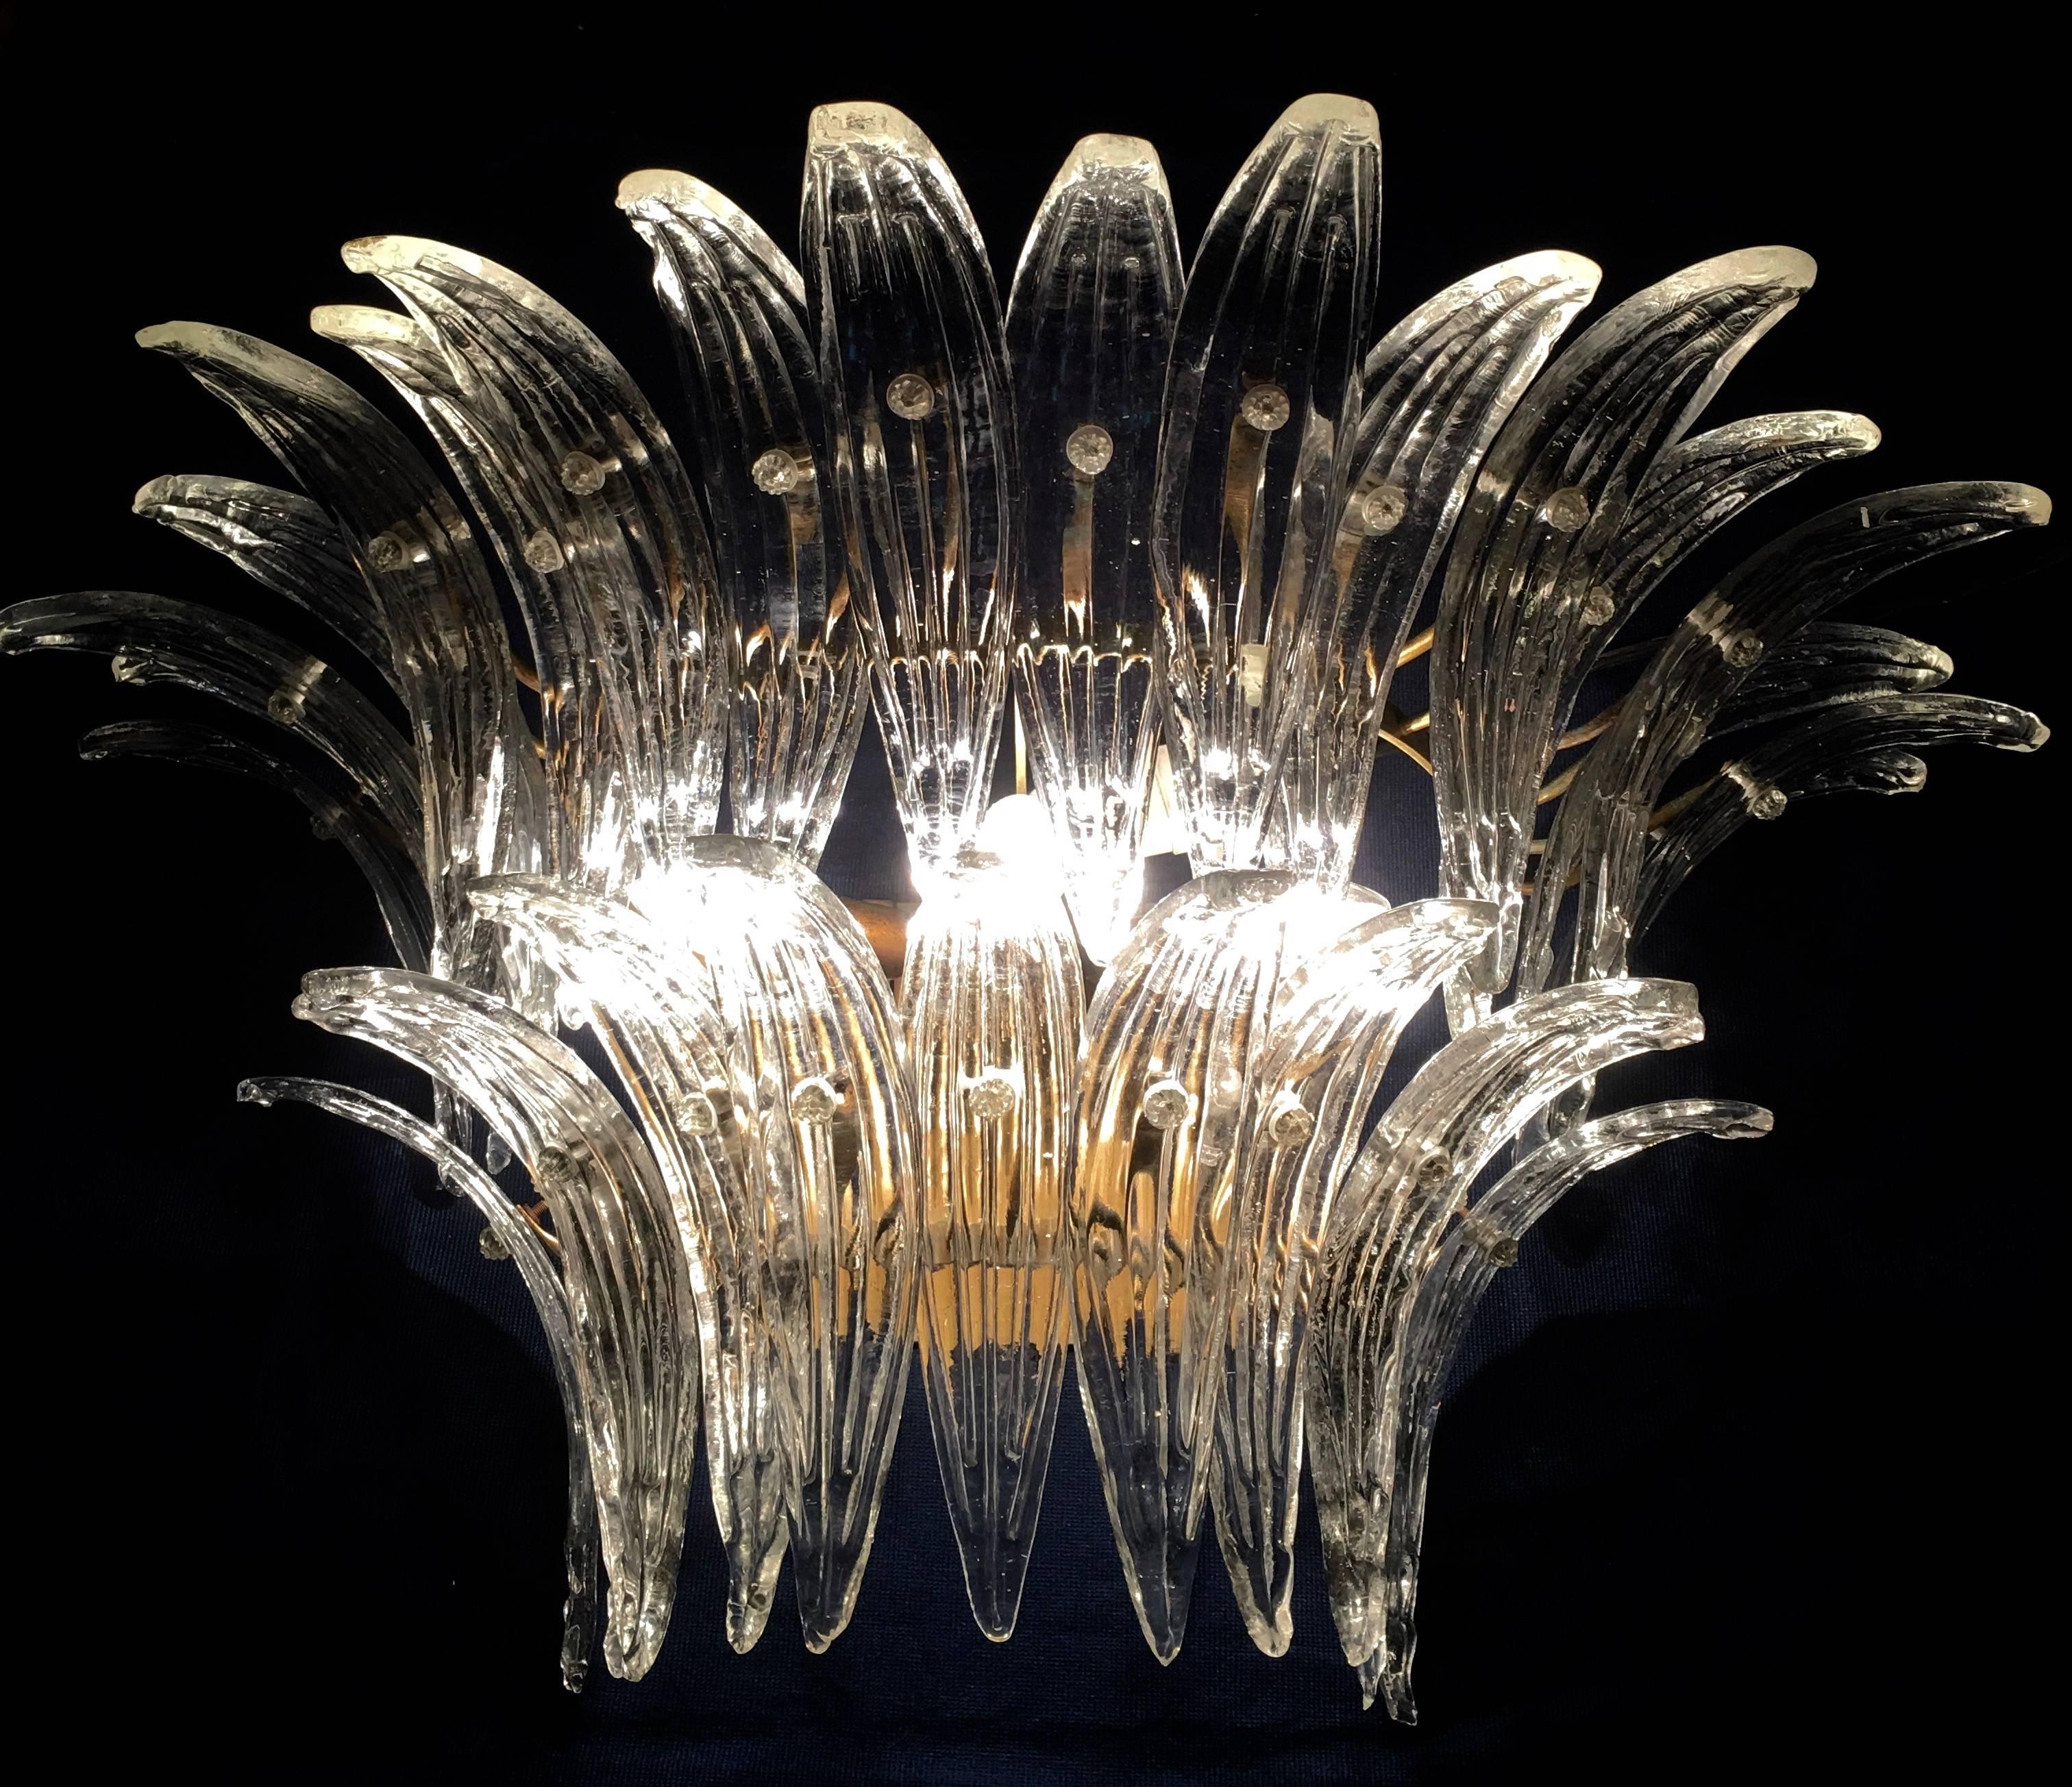 The sconces and chandeliers were located in the hall of a big hotel on the Amalfi Coast. Each individual sconce is composed by 29 large leaves in pure Murano glass. Available seven pairs of sconces and two pairs of chandeliers.